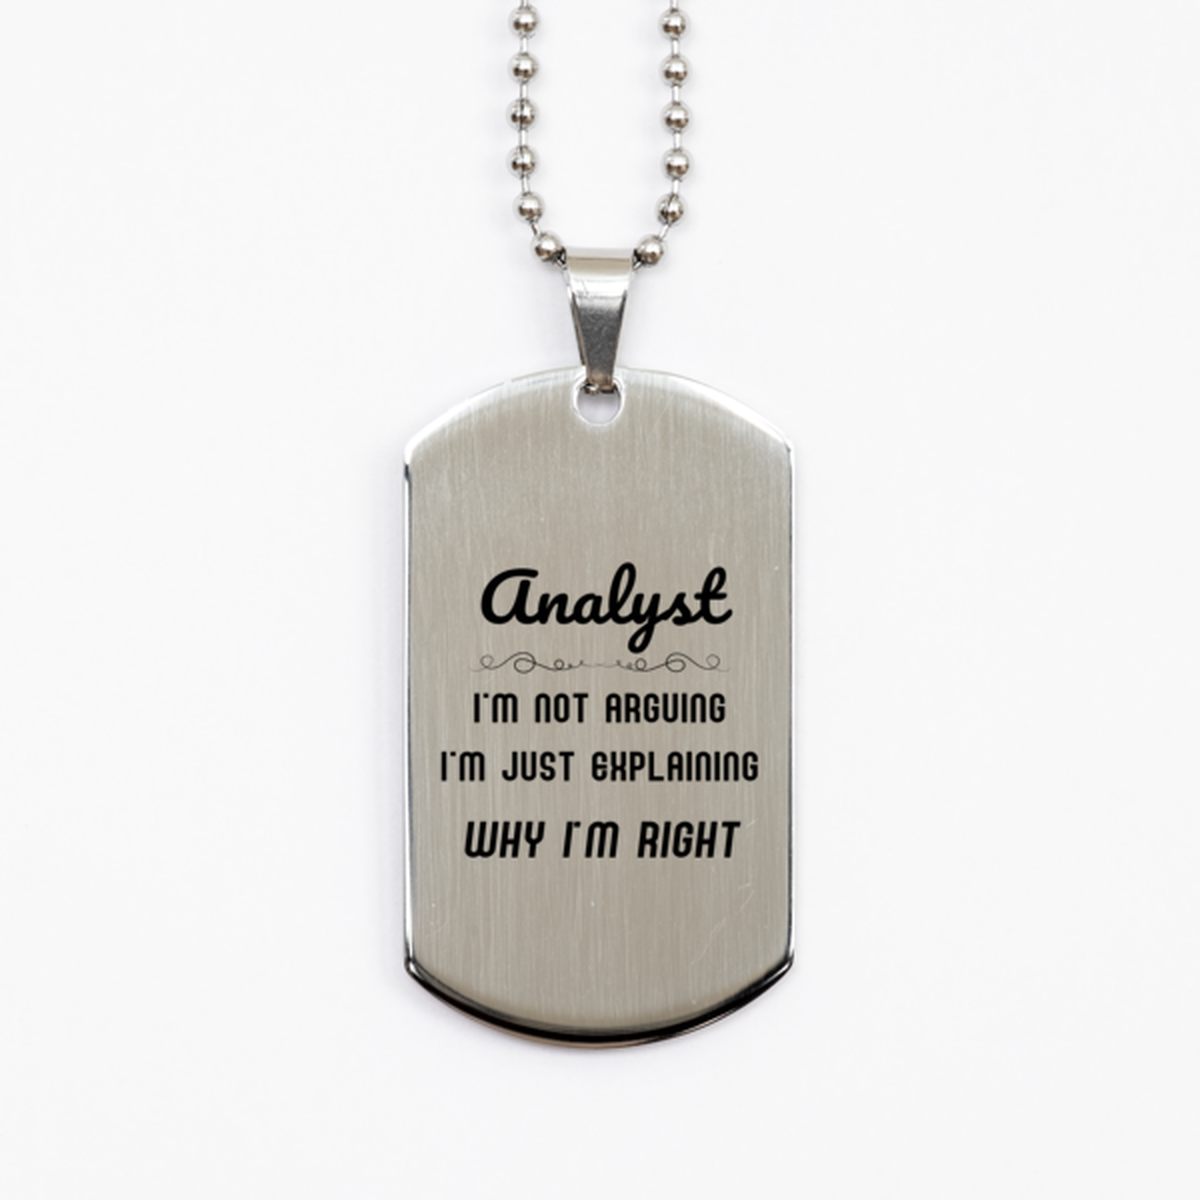 Analyst I'm not Arguing. I'm Just Explaining Why I'm RIGHT Silver Dog Tag, Funny Saying Quote Analyst Gifts For Analyst Graduation Birthday Christmas Gifts for Men Women Coworker